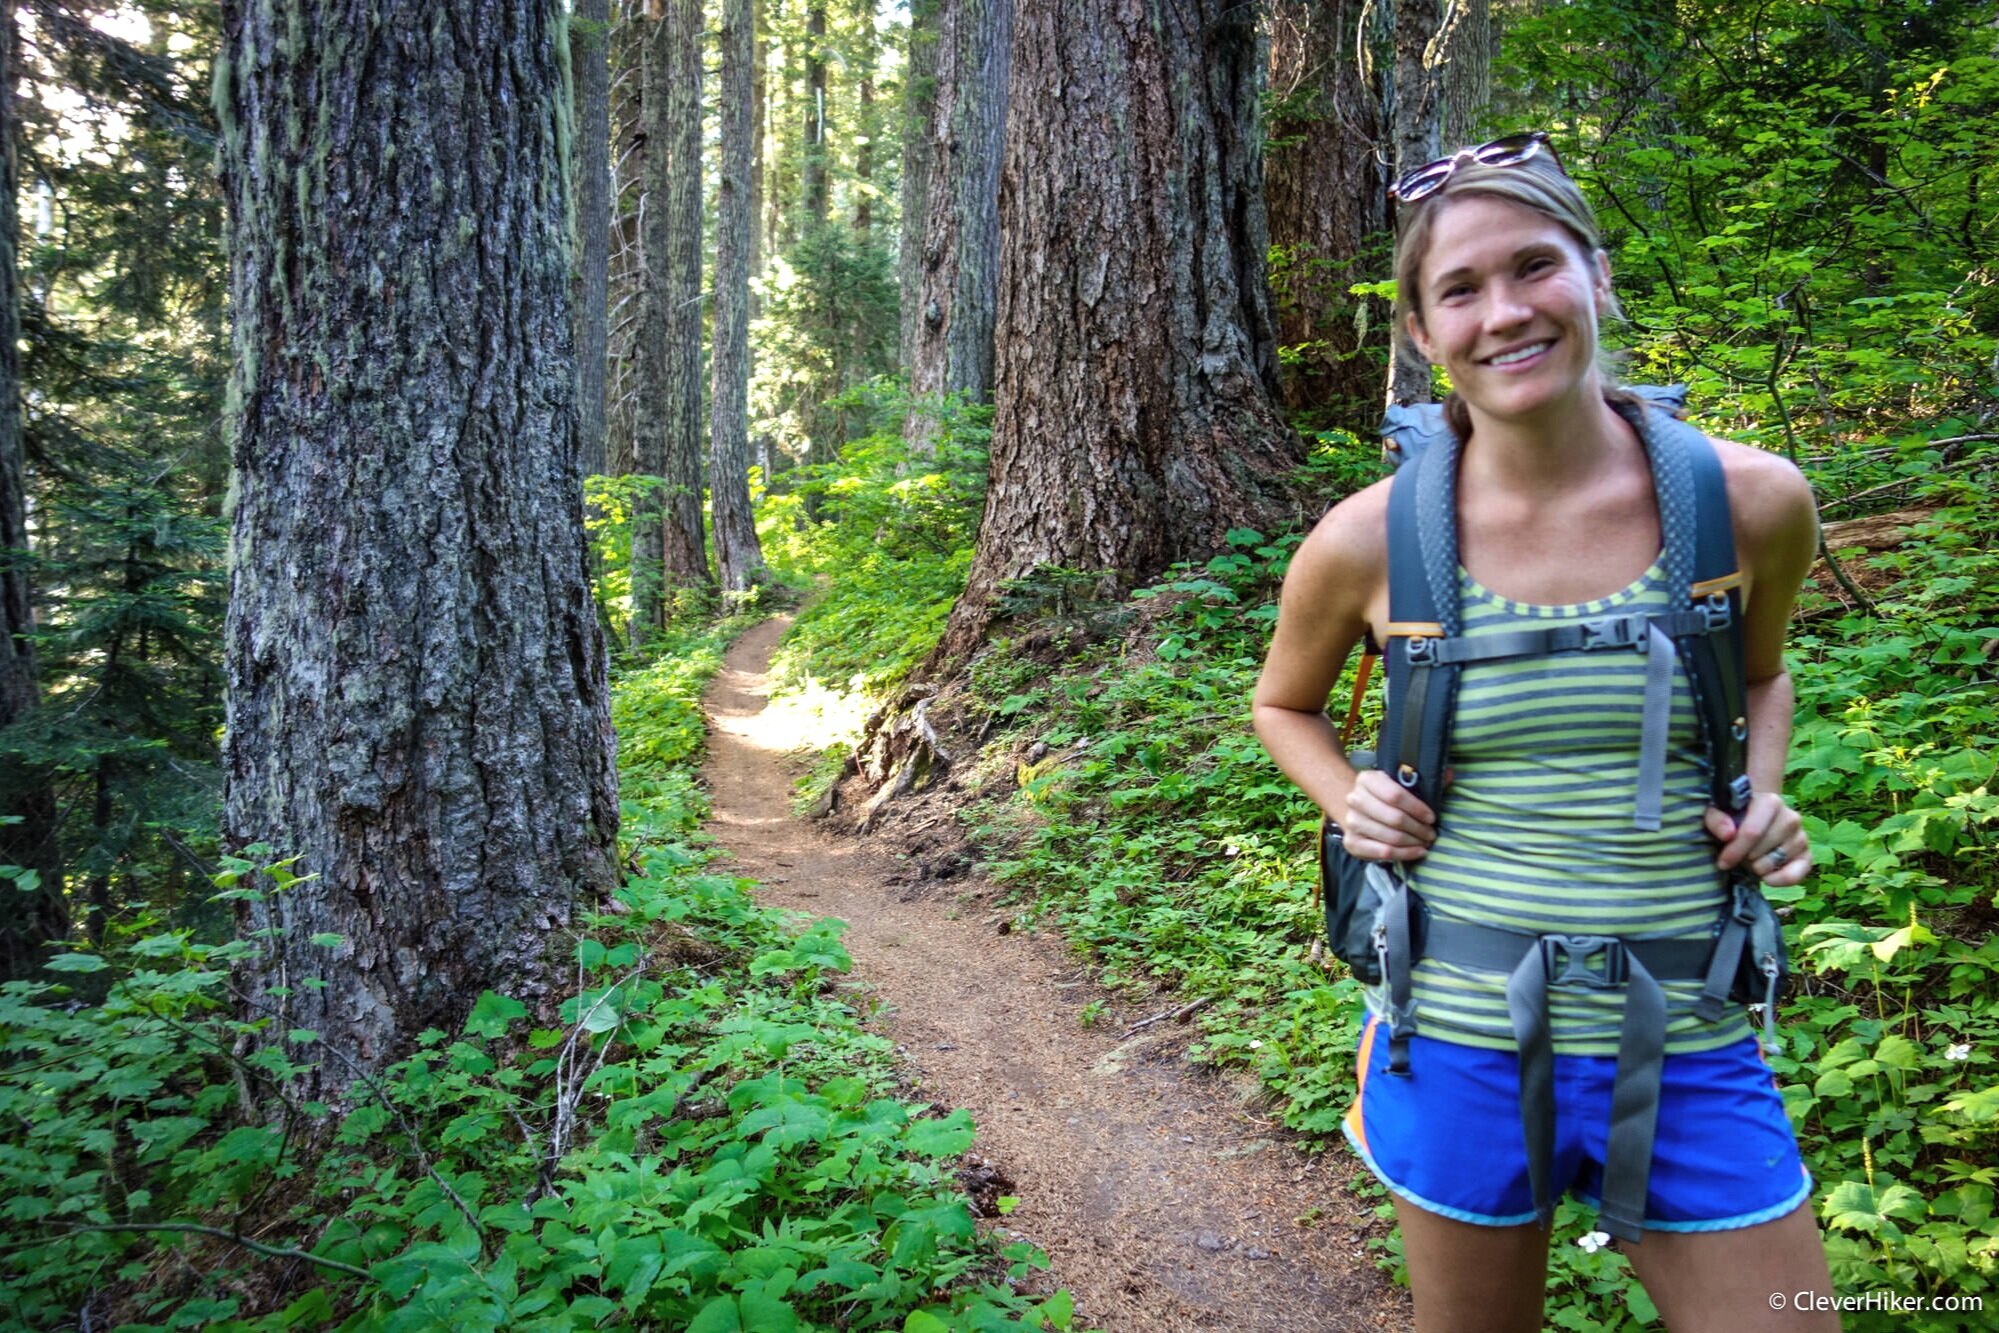 A hiker training for a backpacking trip in the woods with a trail in the background